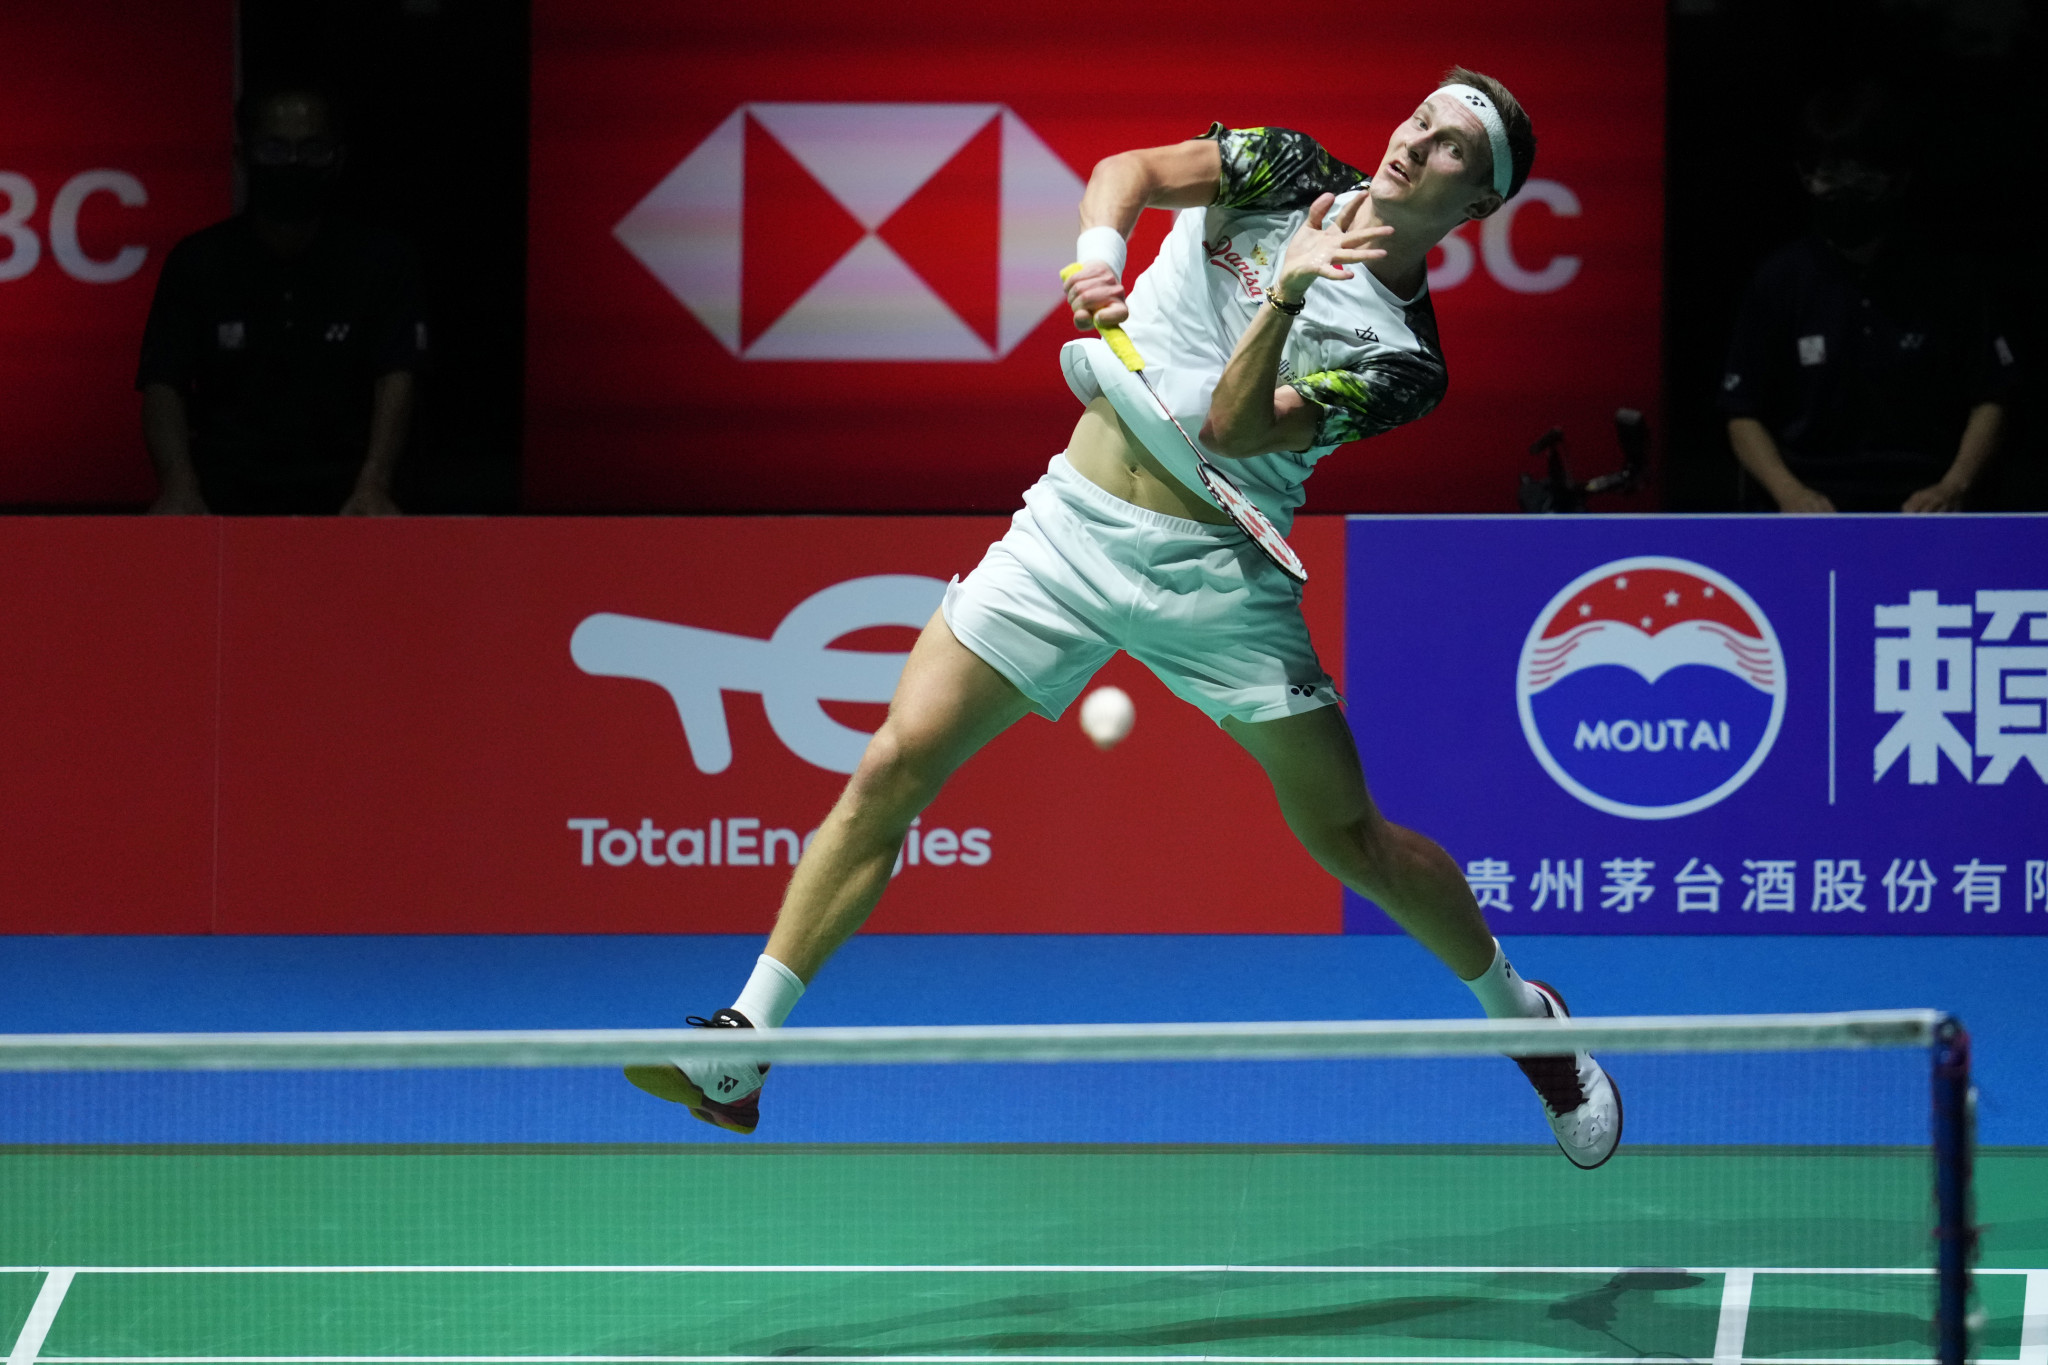 Top seeds Axelsen and Yamaguchi reach singles finals at Badminton World Federation Malaysian Open